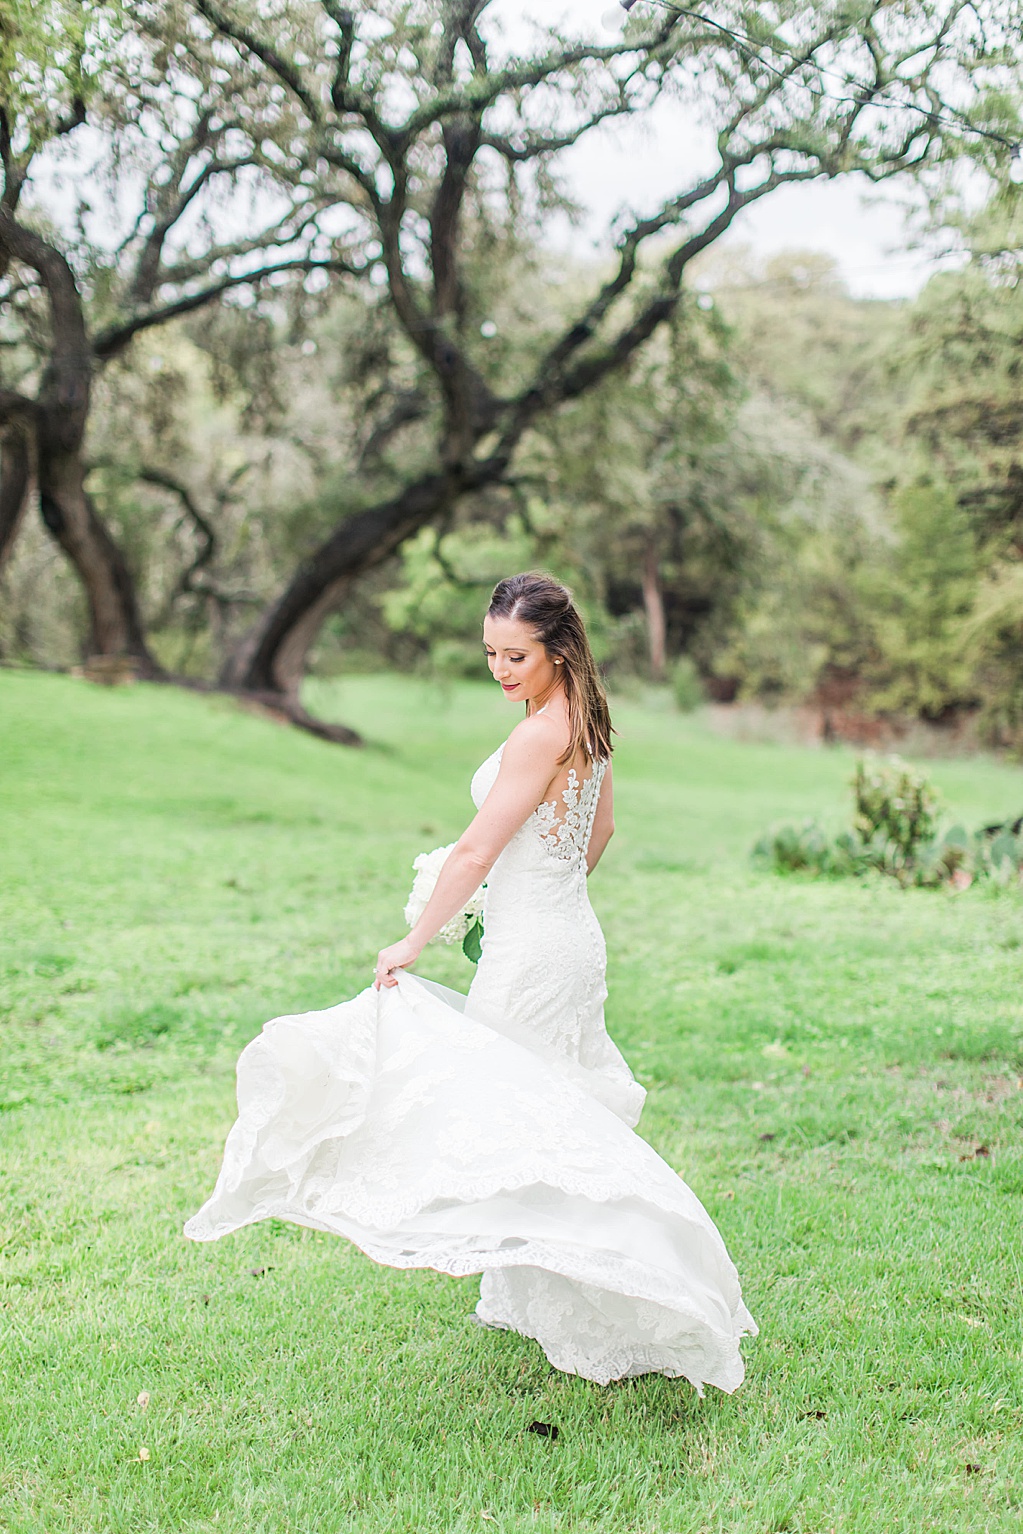 Rainy day bridal session at sisterdale dancehall in boerne texas 0017